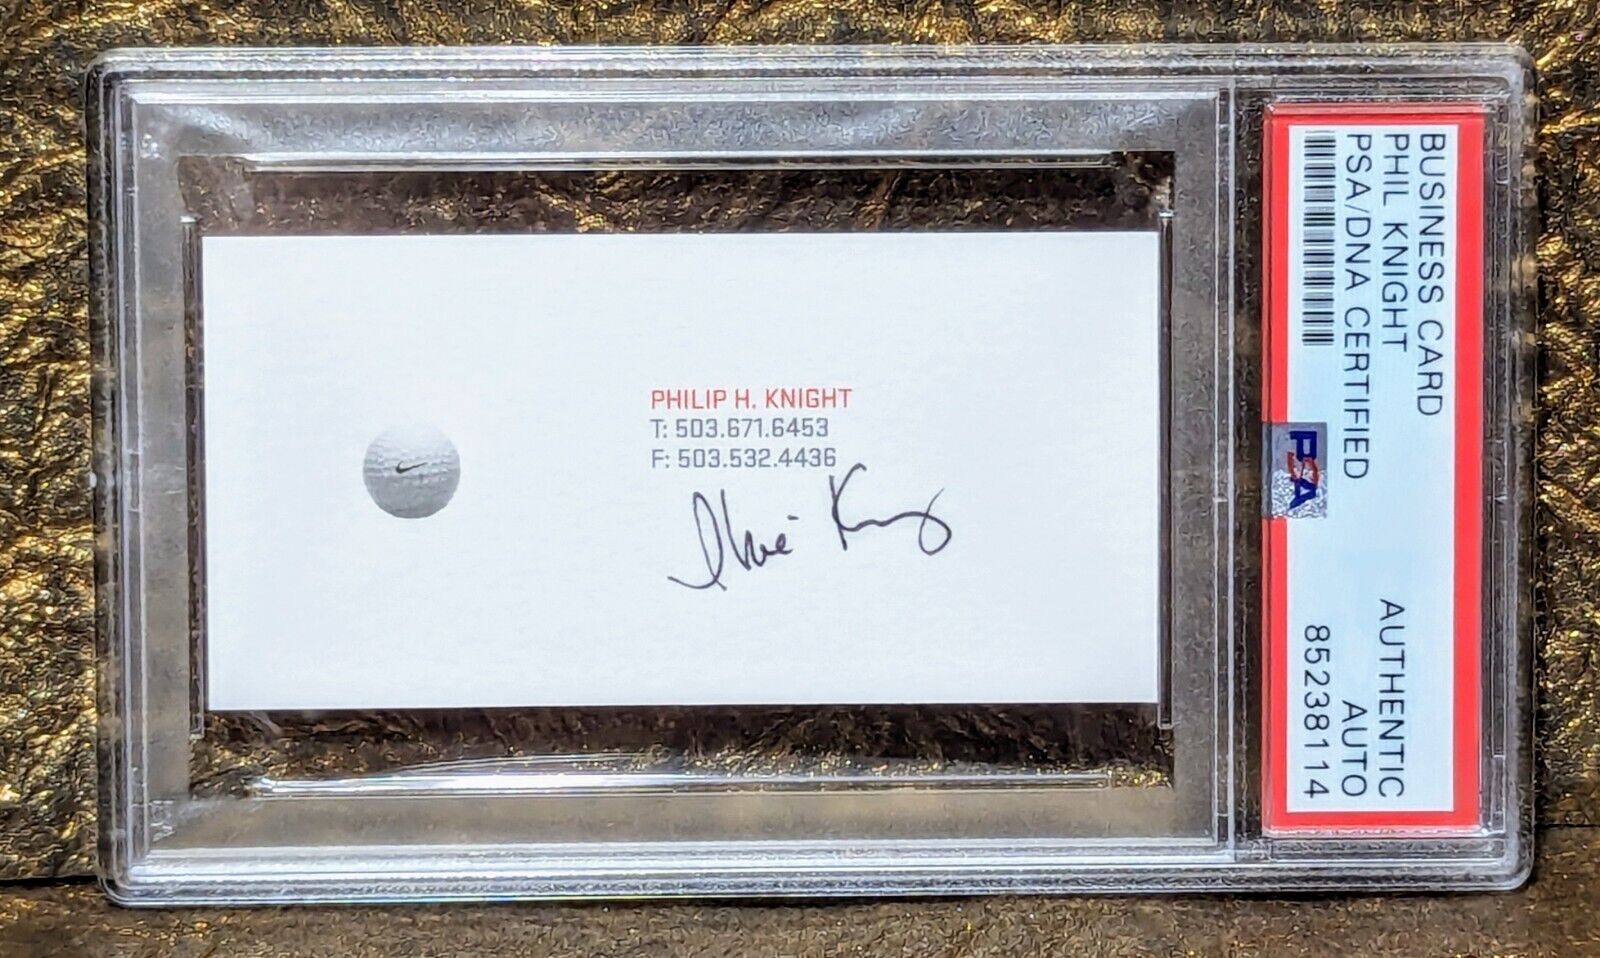 PHIL KNIGHT PSA Autograph Signed Business Card Nike GOLF